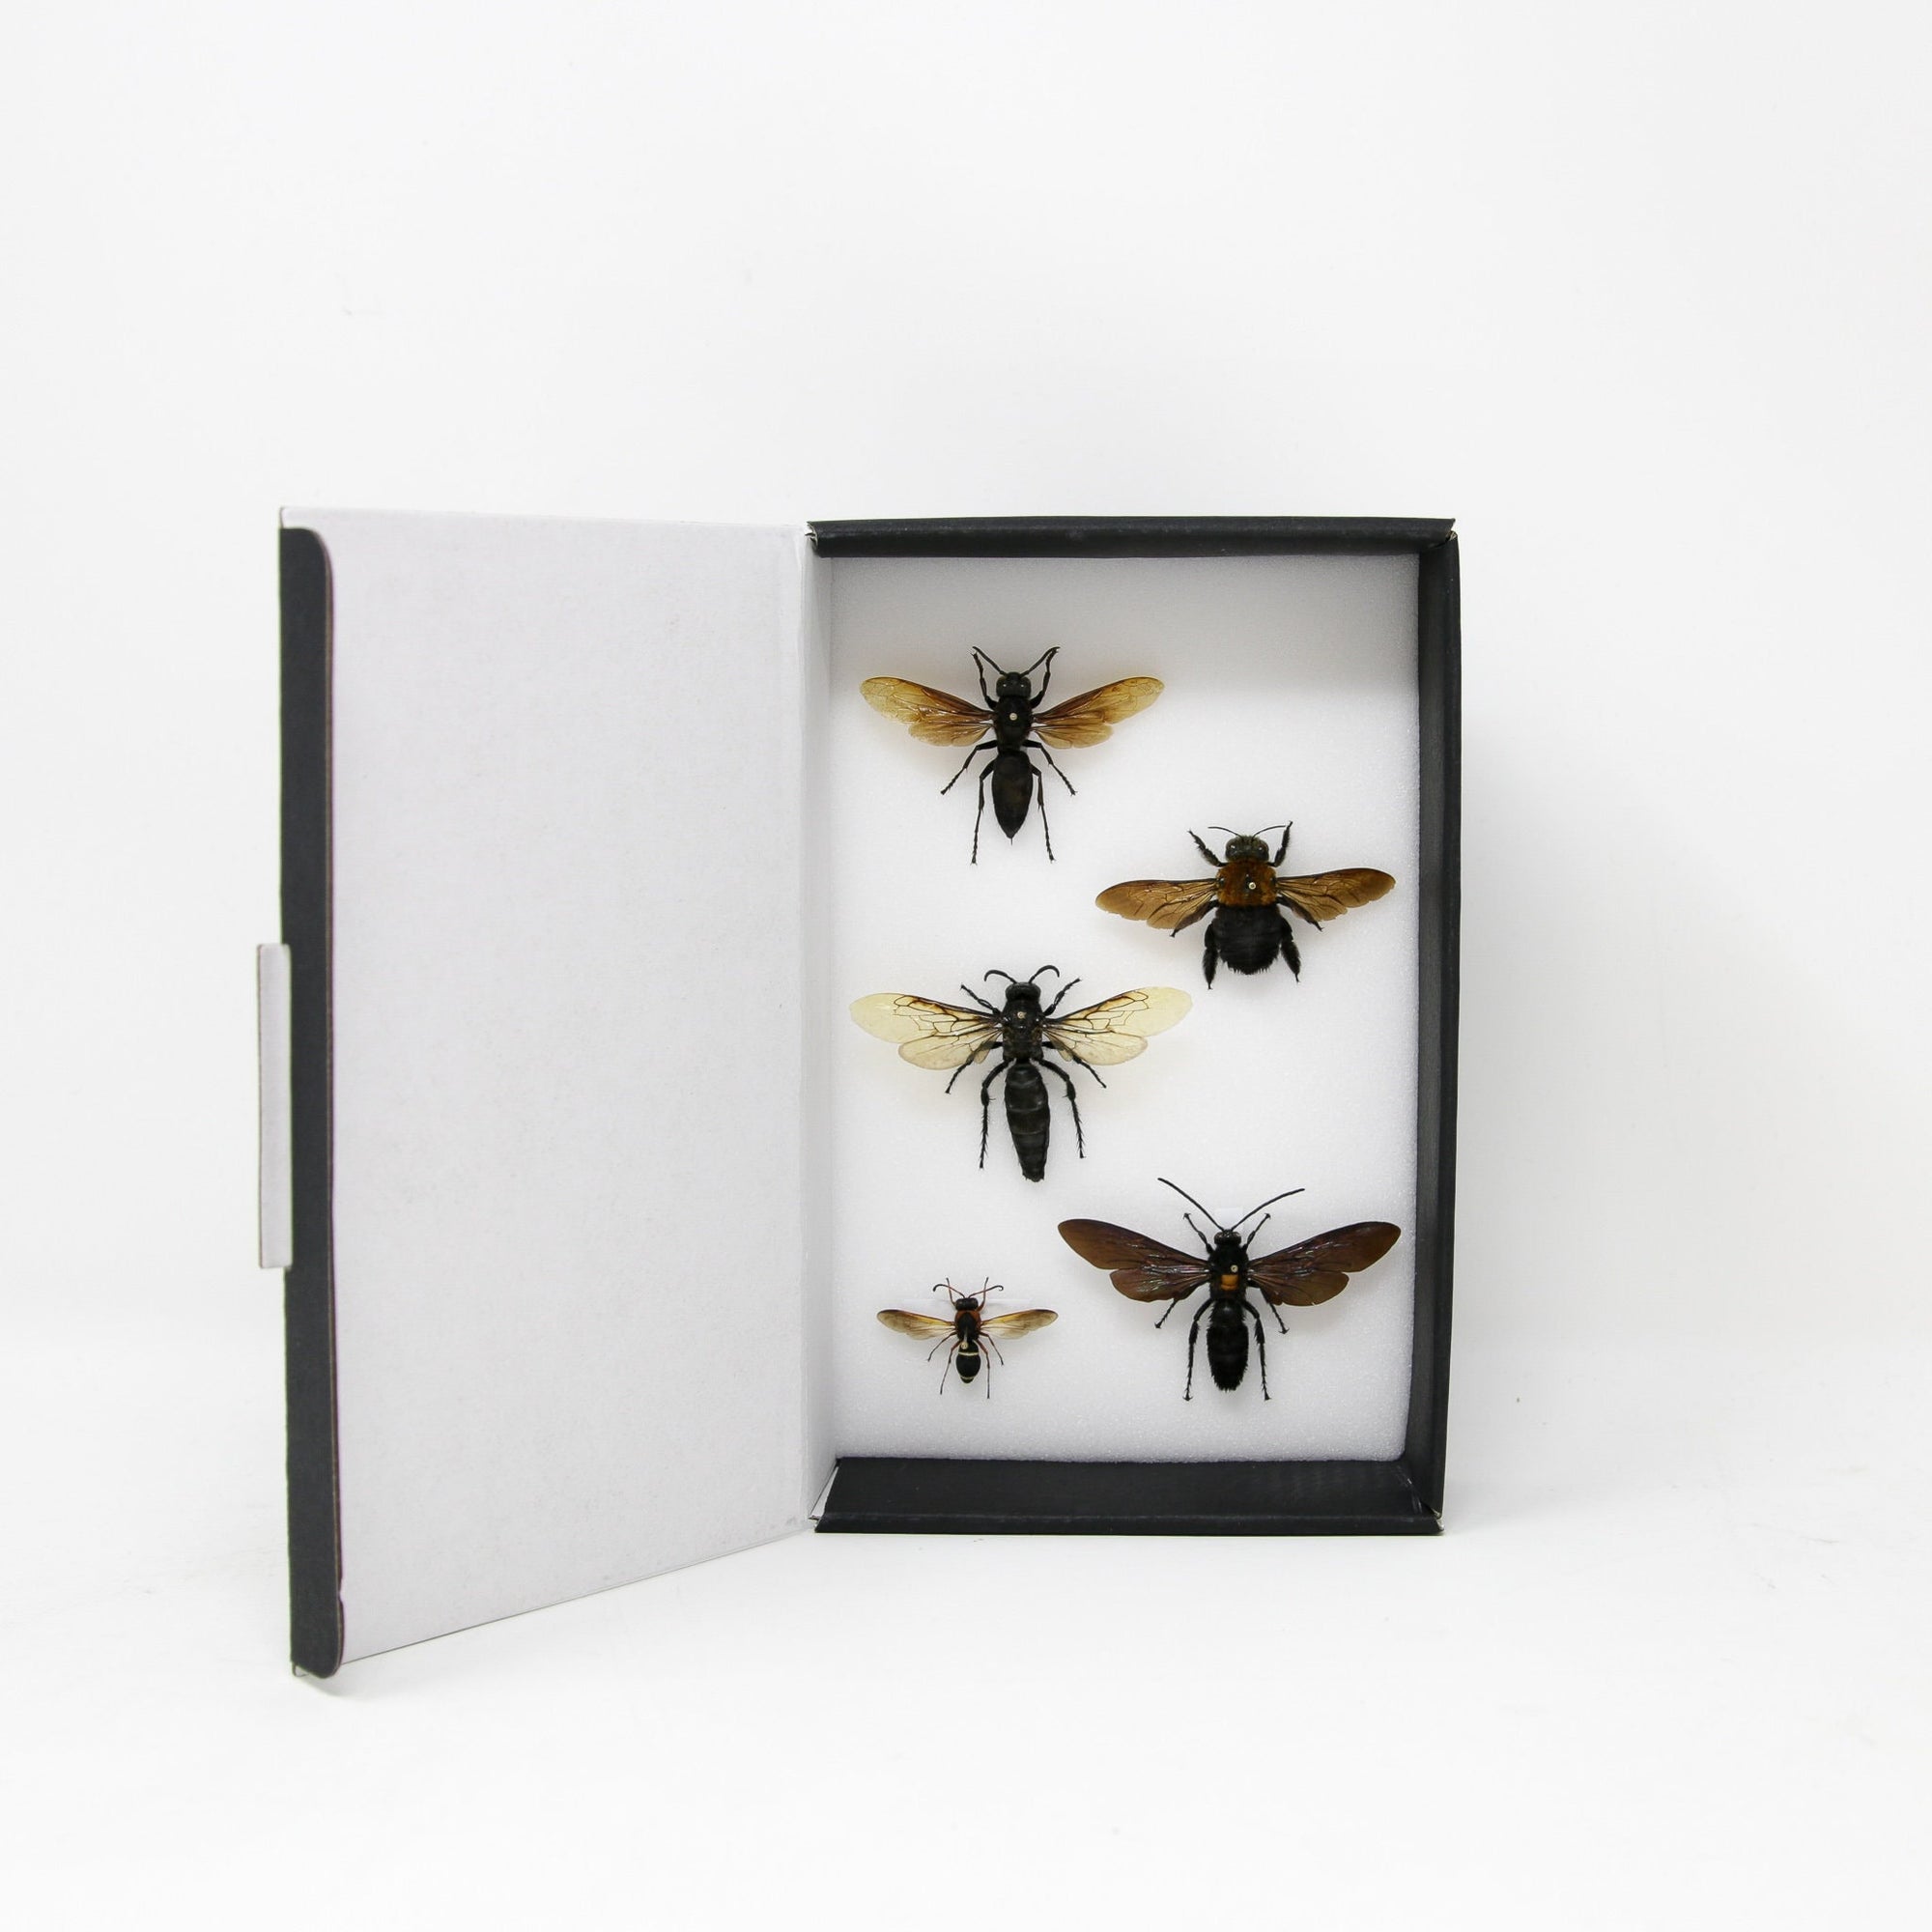 A Collection of Pinned Bees & Wasps (Hymenoptera)  inc. Scientific Collection Data, A1 Quality, Vintage Specimens (#SKU23)